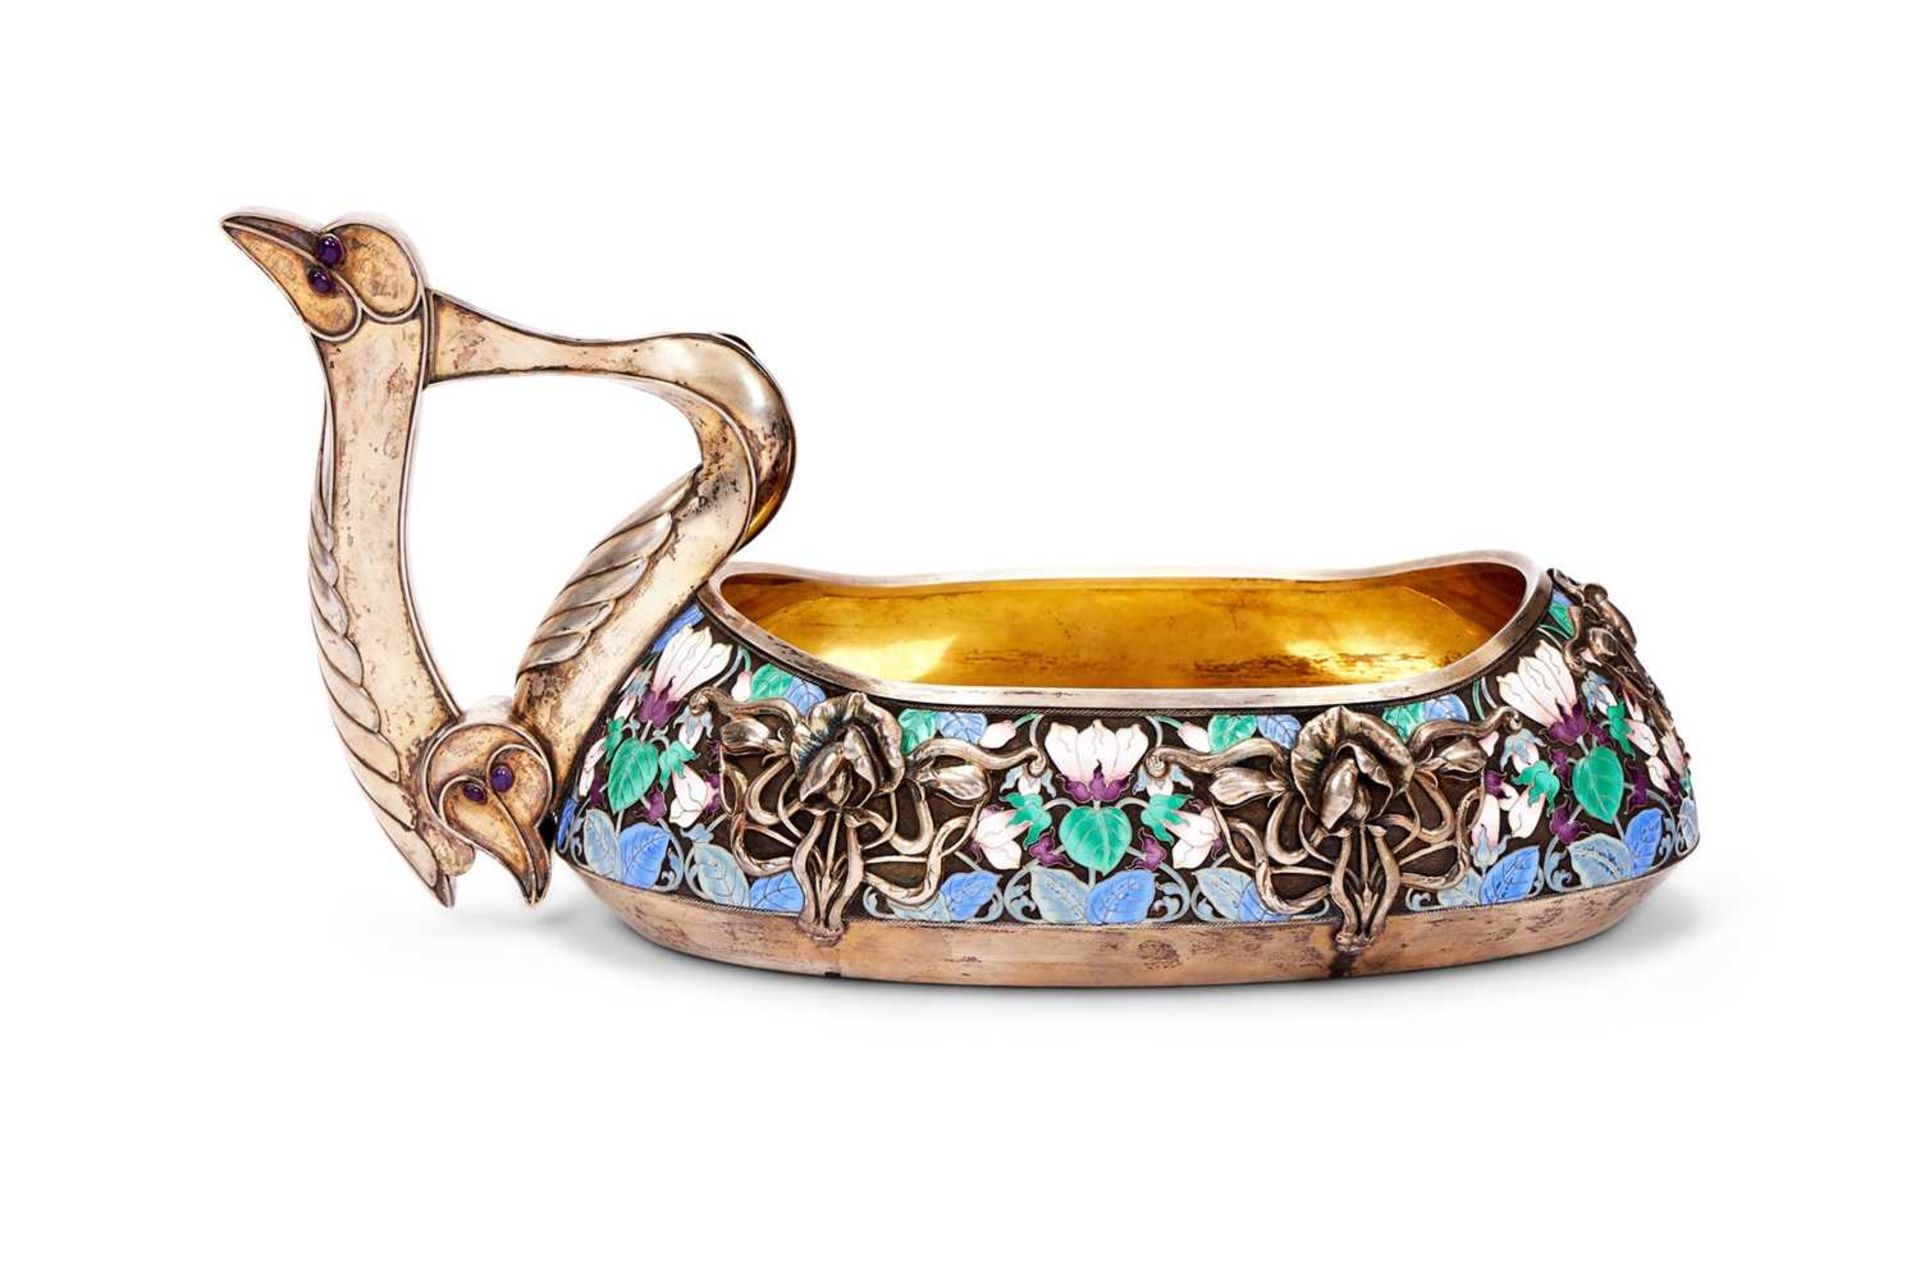 A MASSIVE EARLY 20TH CENTURY RUSSIAN SILVER AND ENAMEL KOVSH IN THE FORM OF A SWAN - Image 2 of 28